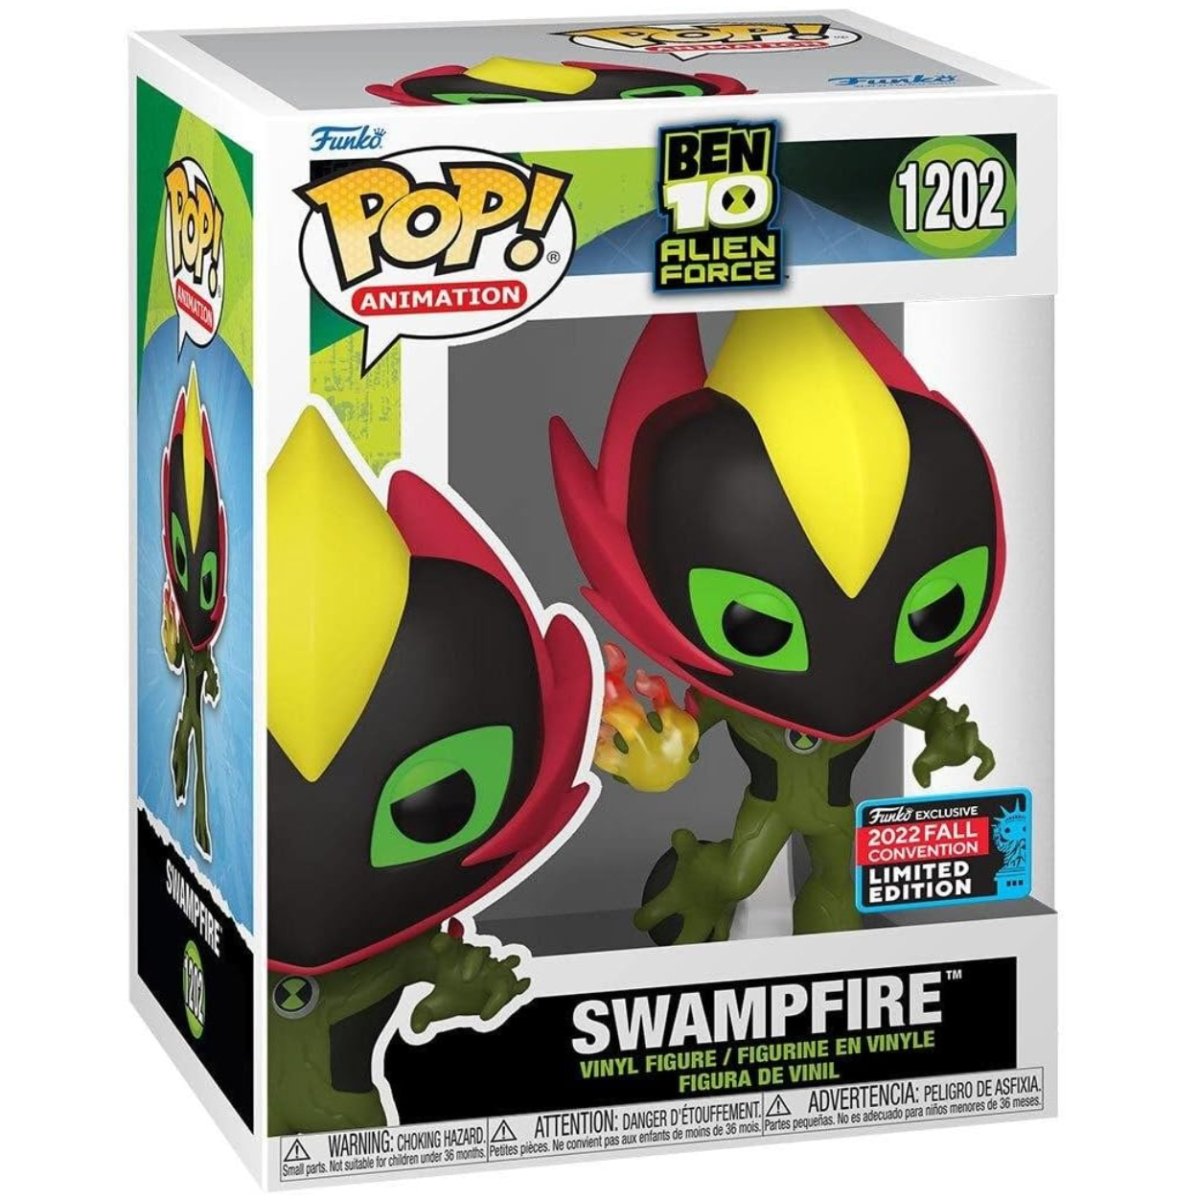 Ben 10 Alien Force - Swampfire (2022 Fall Convention Limited Edition) #1202 - Funko Pop! Vinyl Animation - Persona Toys